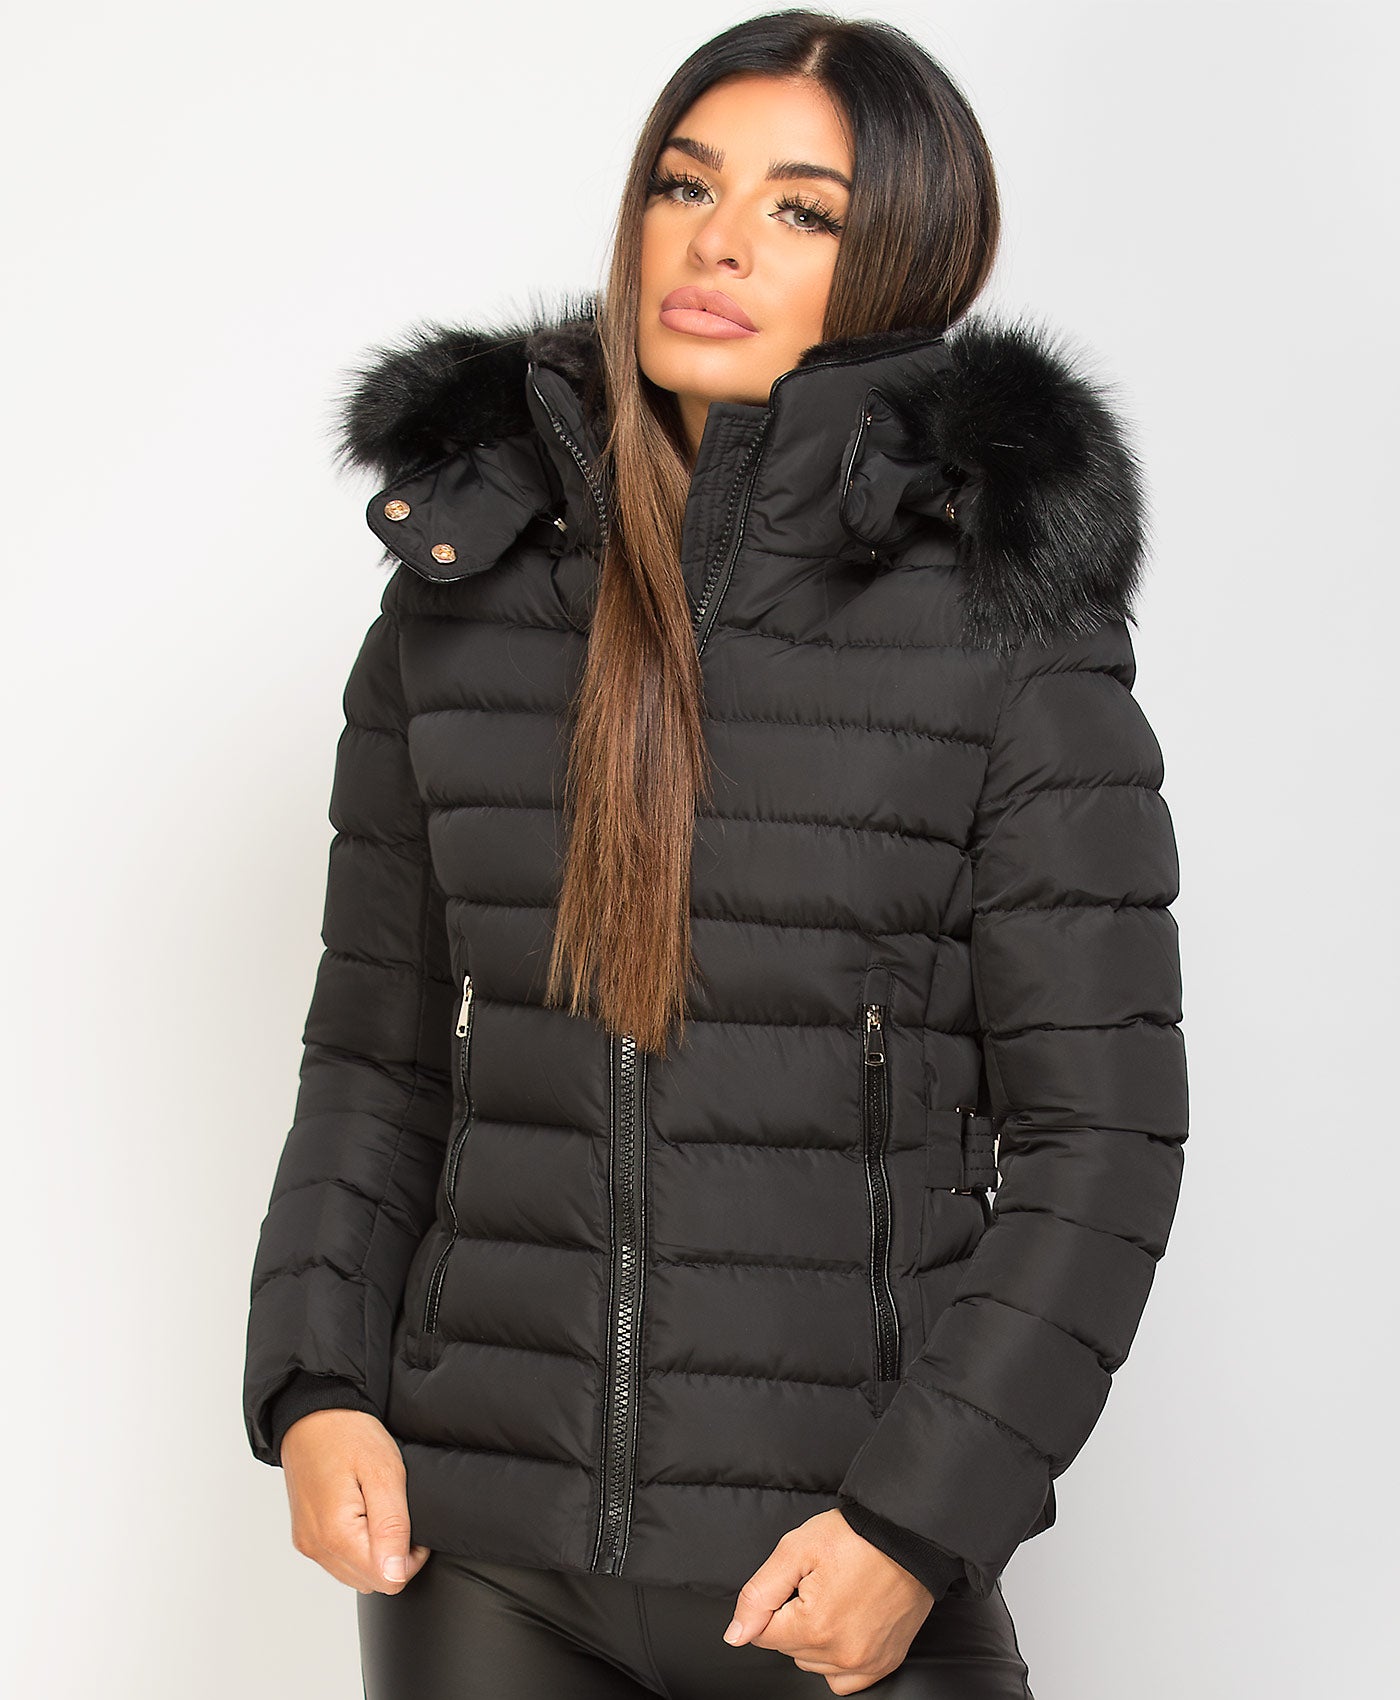 Black-Y-912-Quilted-Padded-Contrast-Fur-Hooded-Puffer-Jacket-5